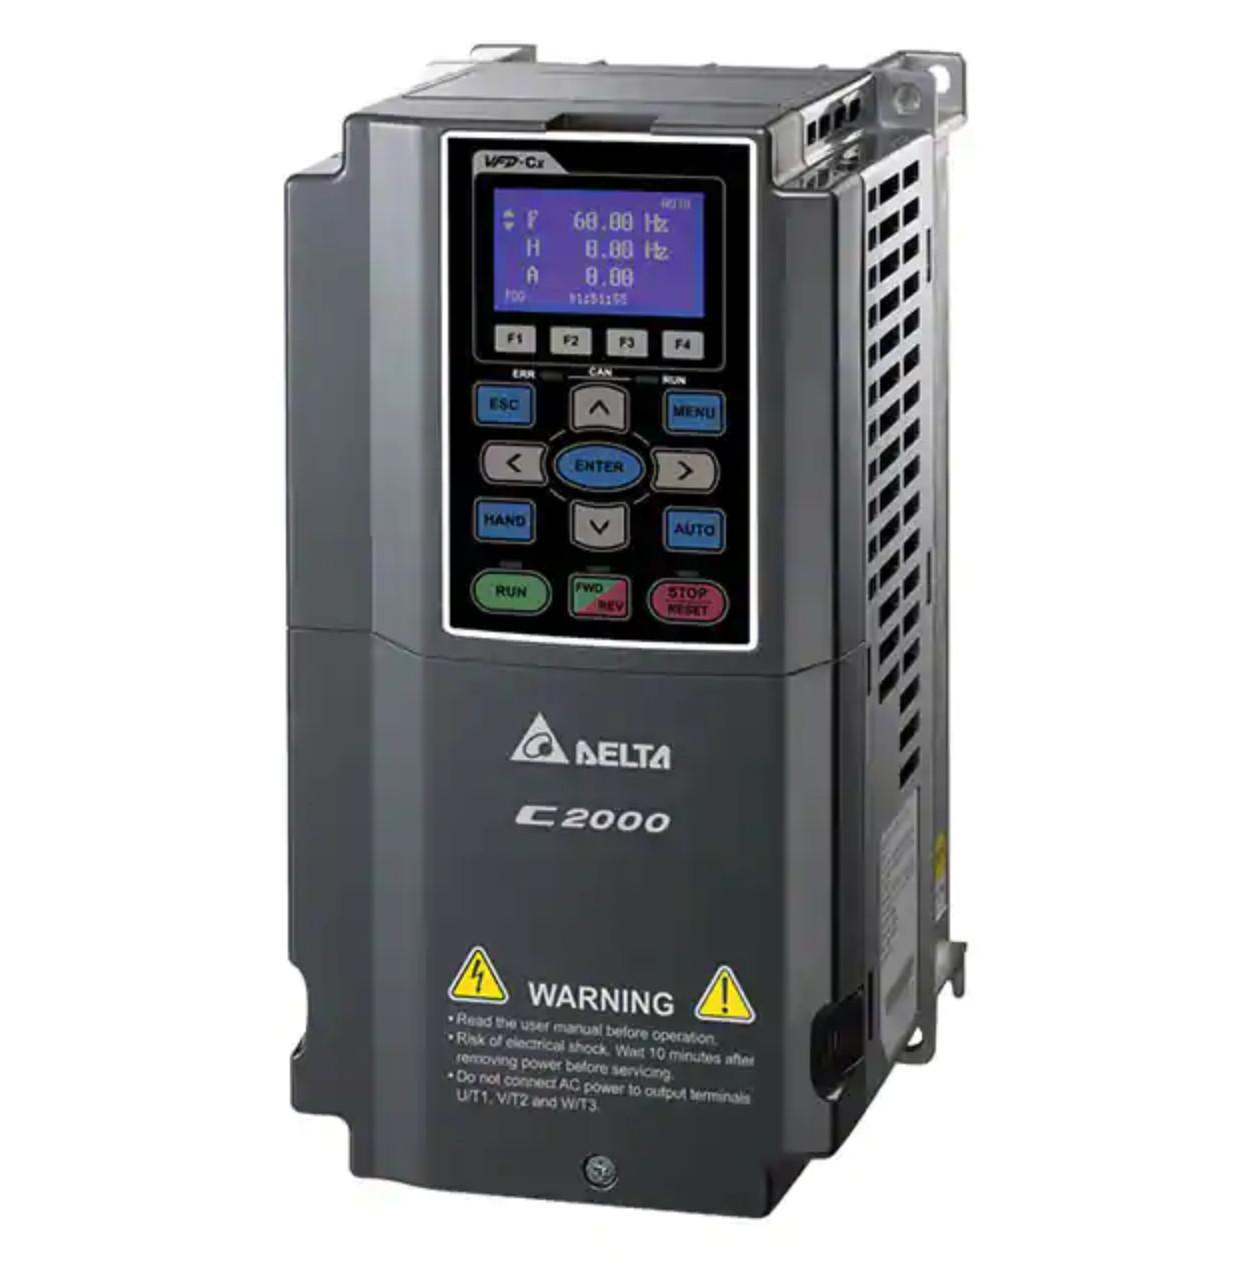 Delta VFD40C4EA-21 Variable Frequency Drive, 3 phase, 460 VAC build-in EMI Input, 5 HP, frame A, wall mount, IP20, NEMA 1